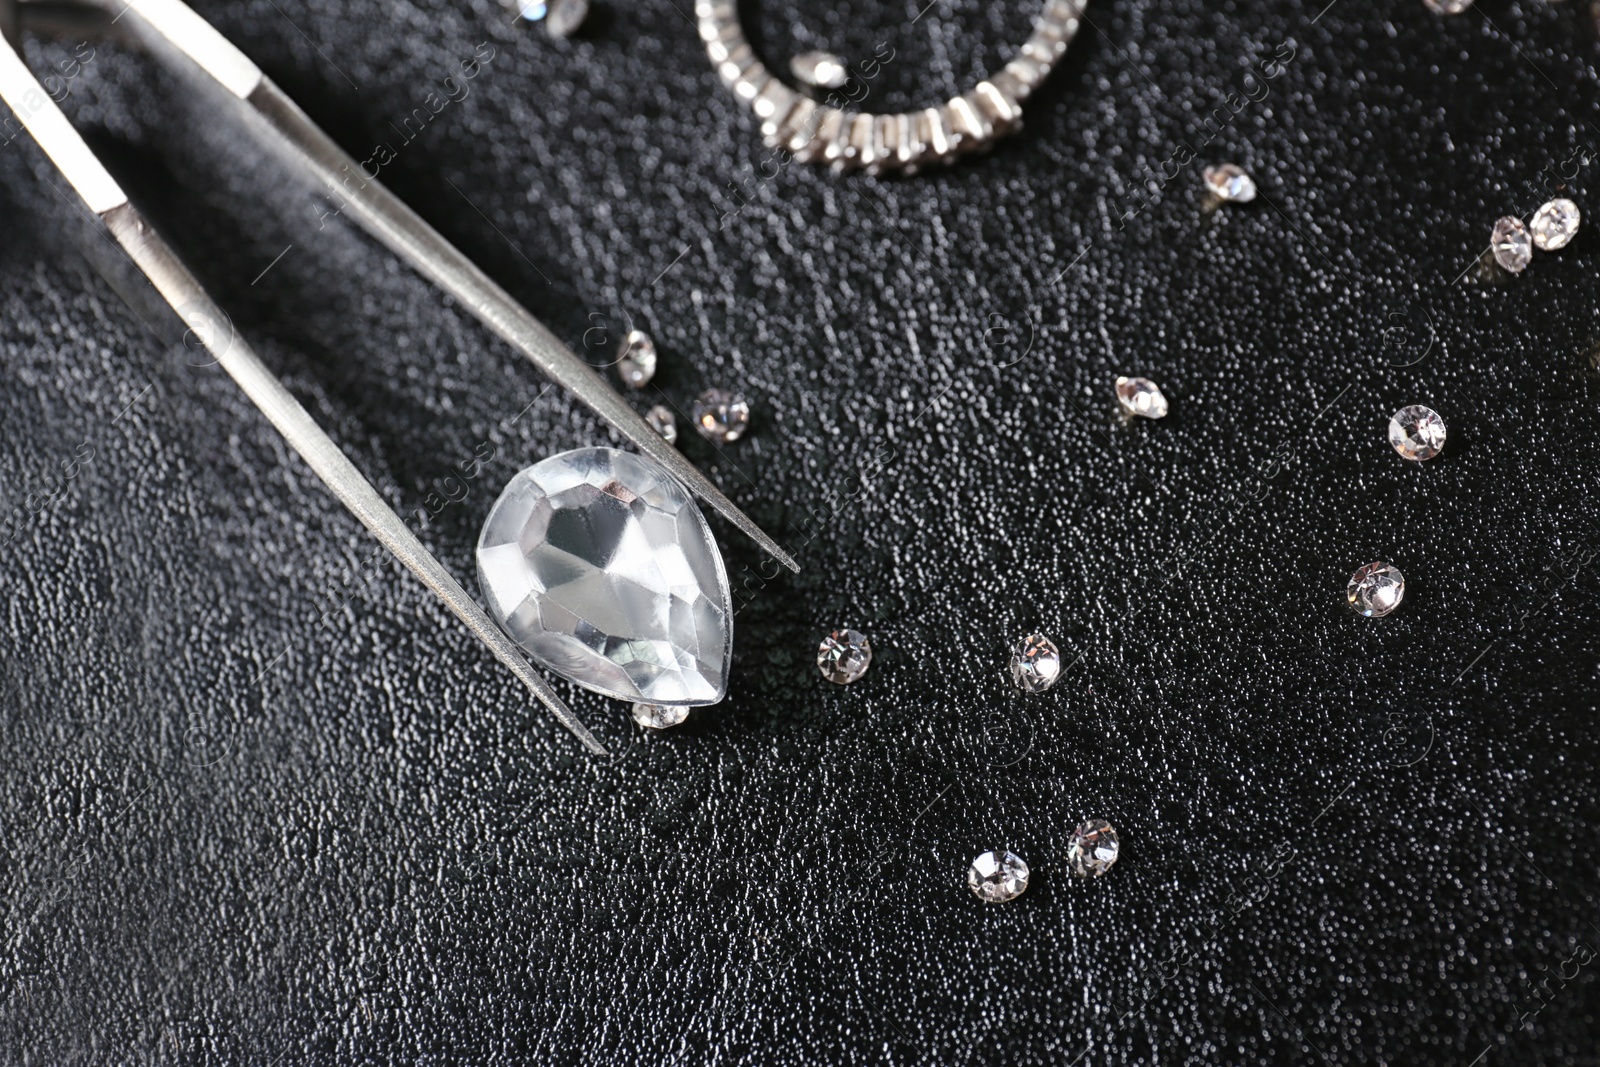 Photo of Jewels and tweezers on black leather surface